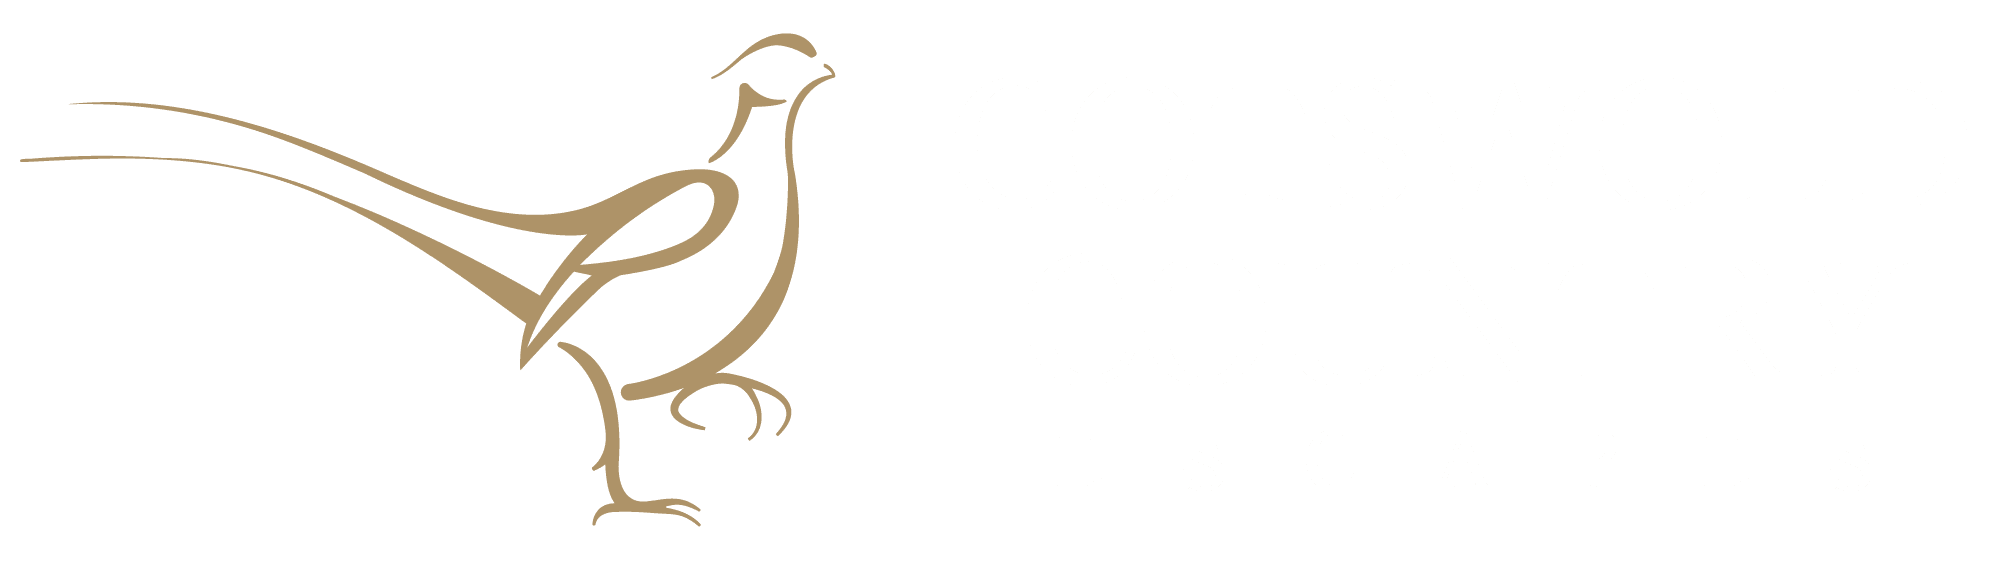 Cotswold-country-final-logo-Colour&White